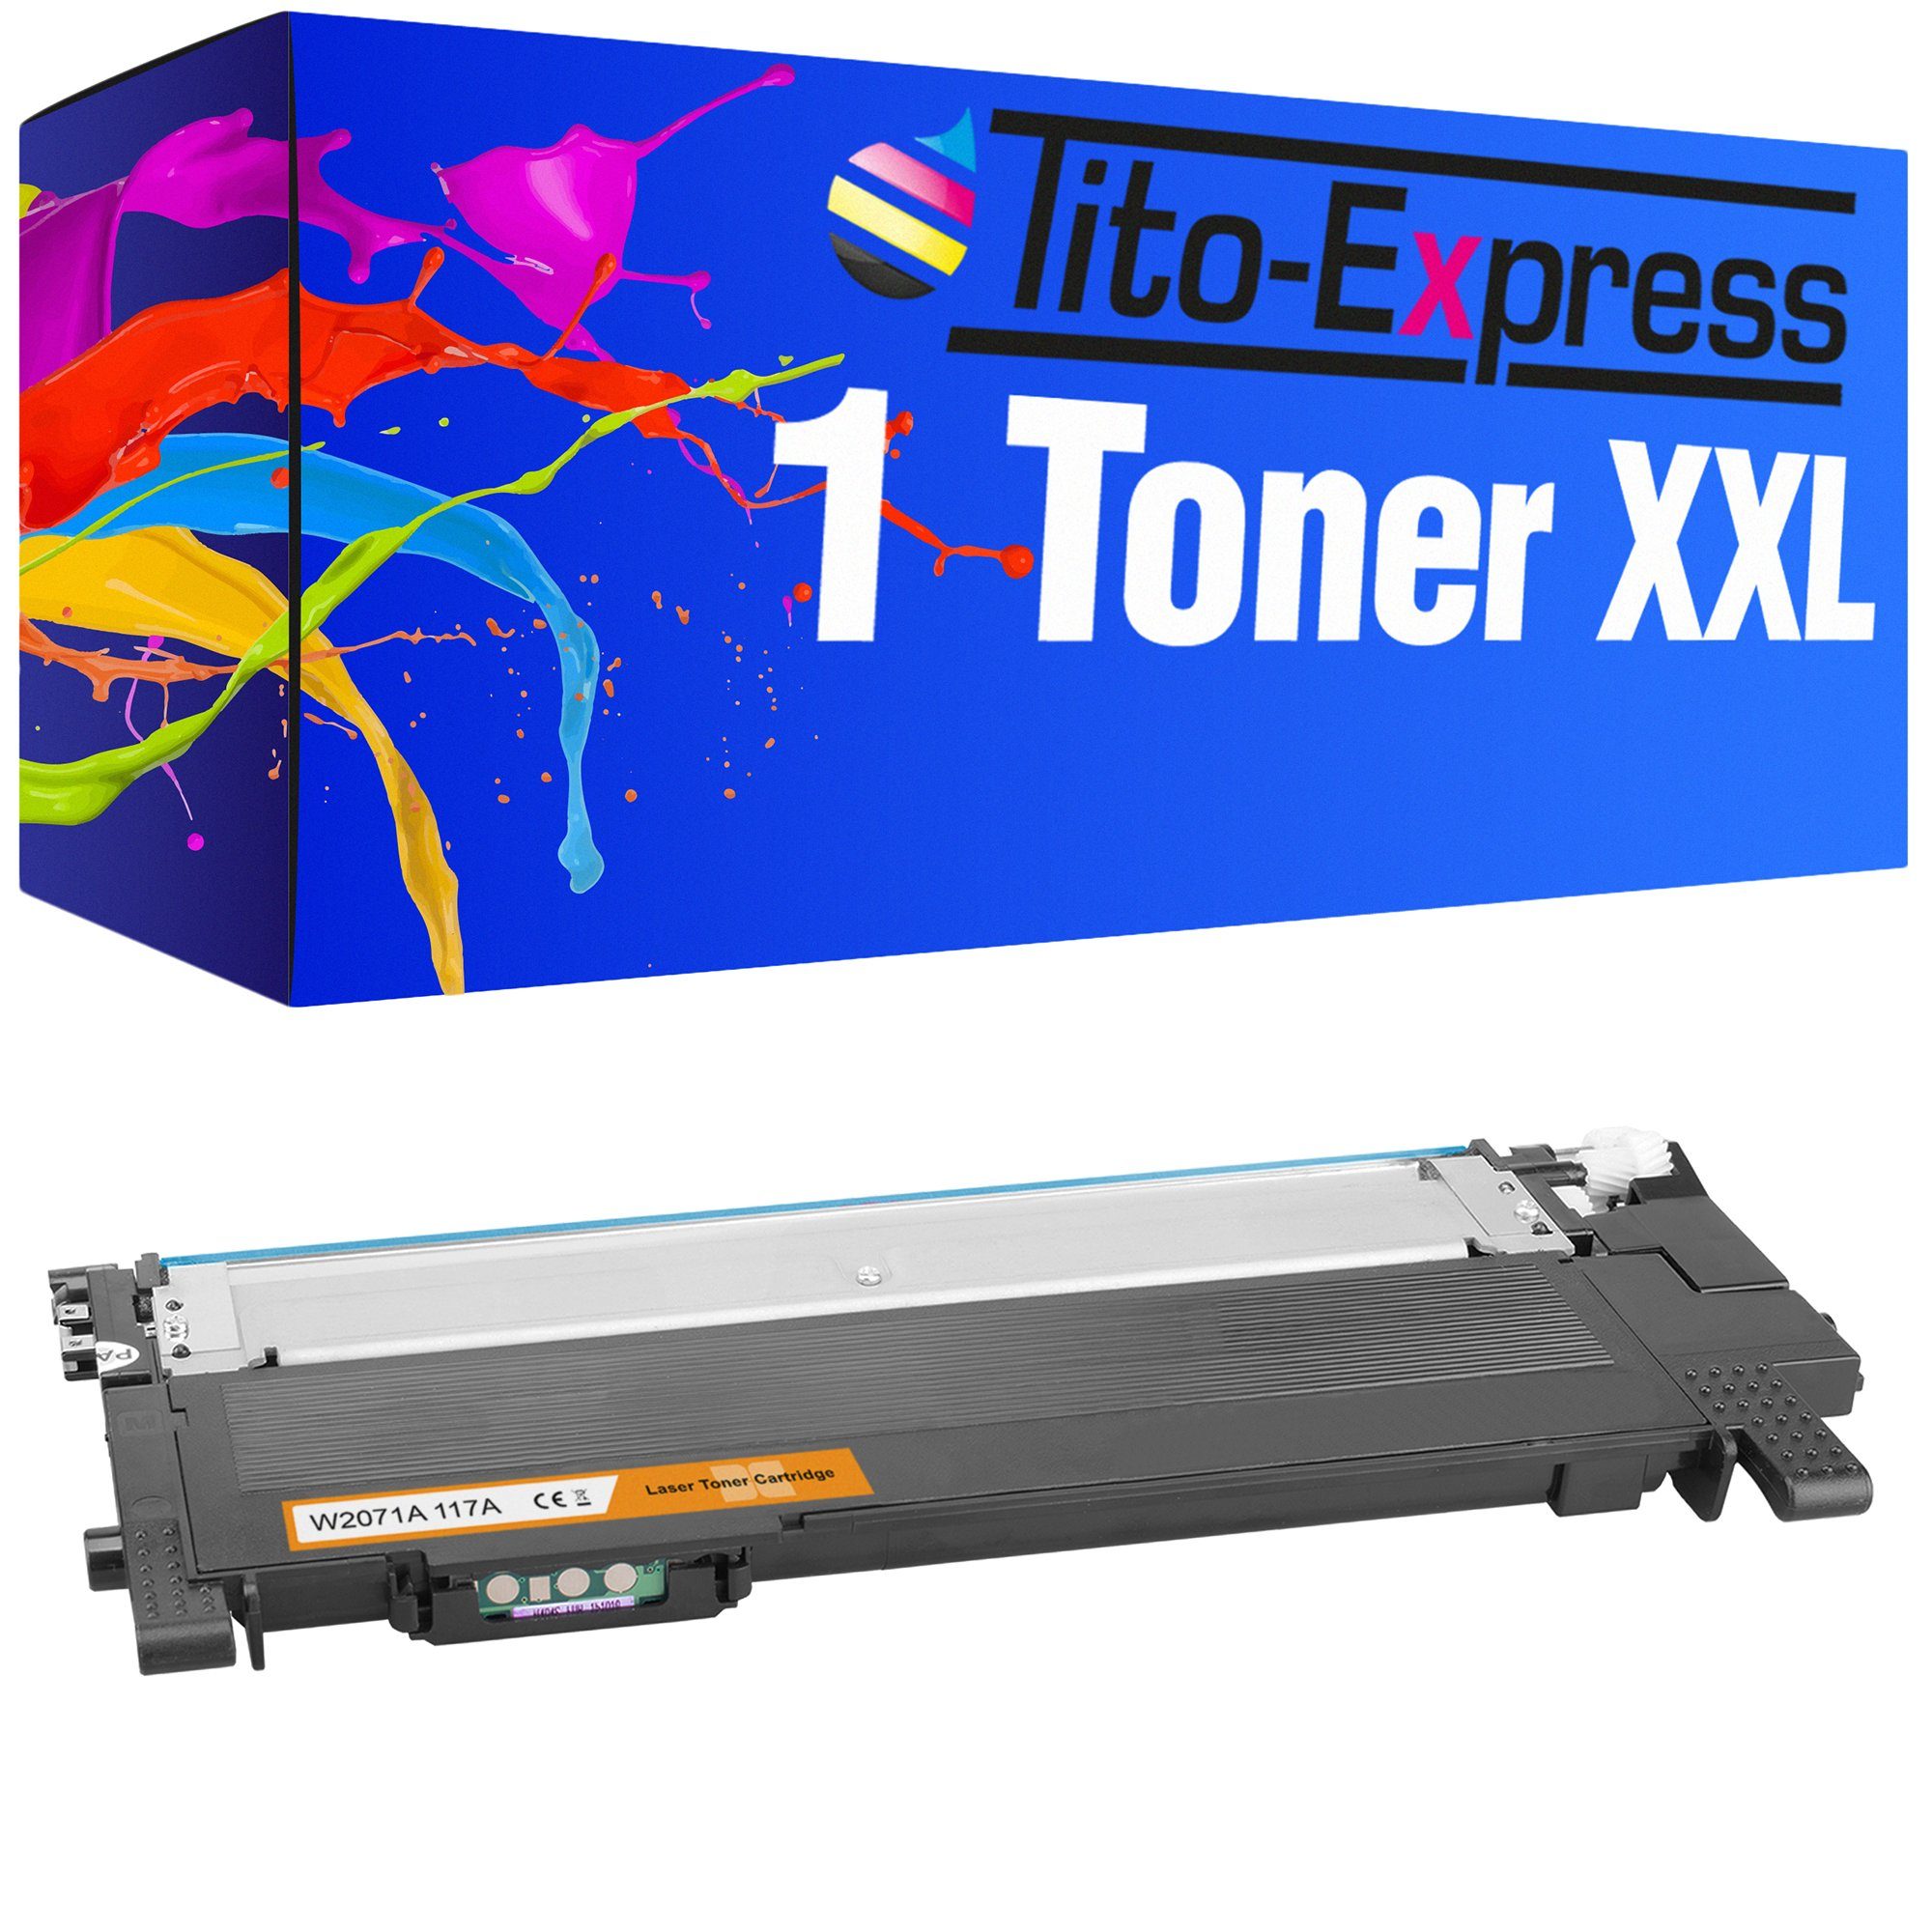 Tito-Express Tonerpatrone ersetzt HP W2070A W 2070 A HP 117A, (1x Cyan), für Color Laser MFP 178nwg 179fwg 150nw 179fnw 150a 178nw MFP-170 | Tonerpatronen